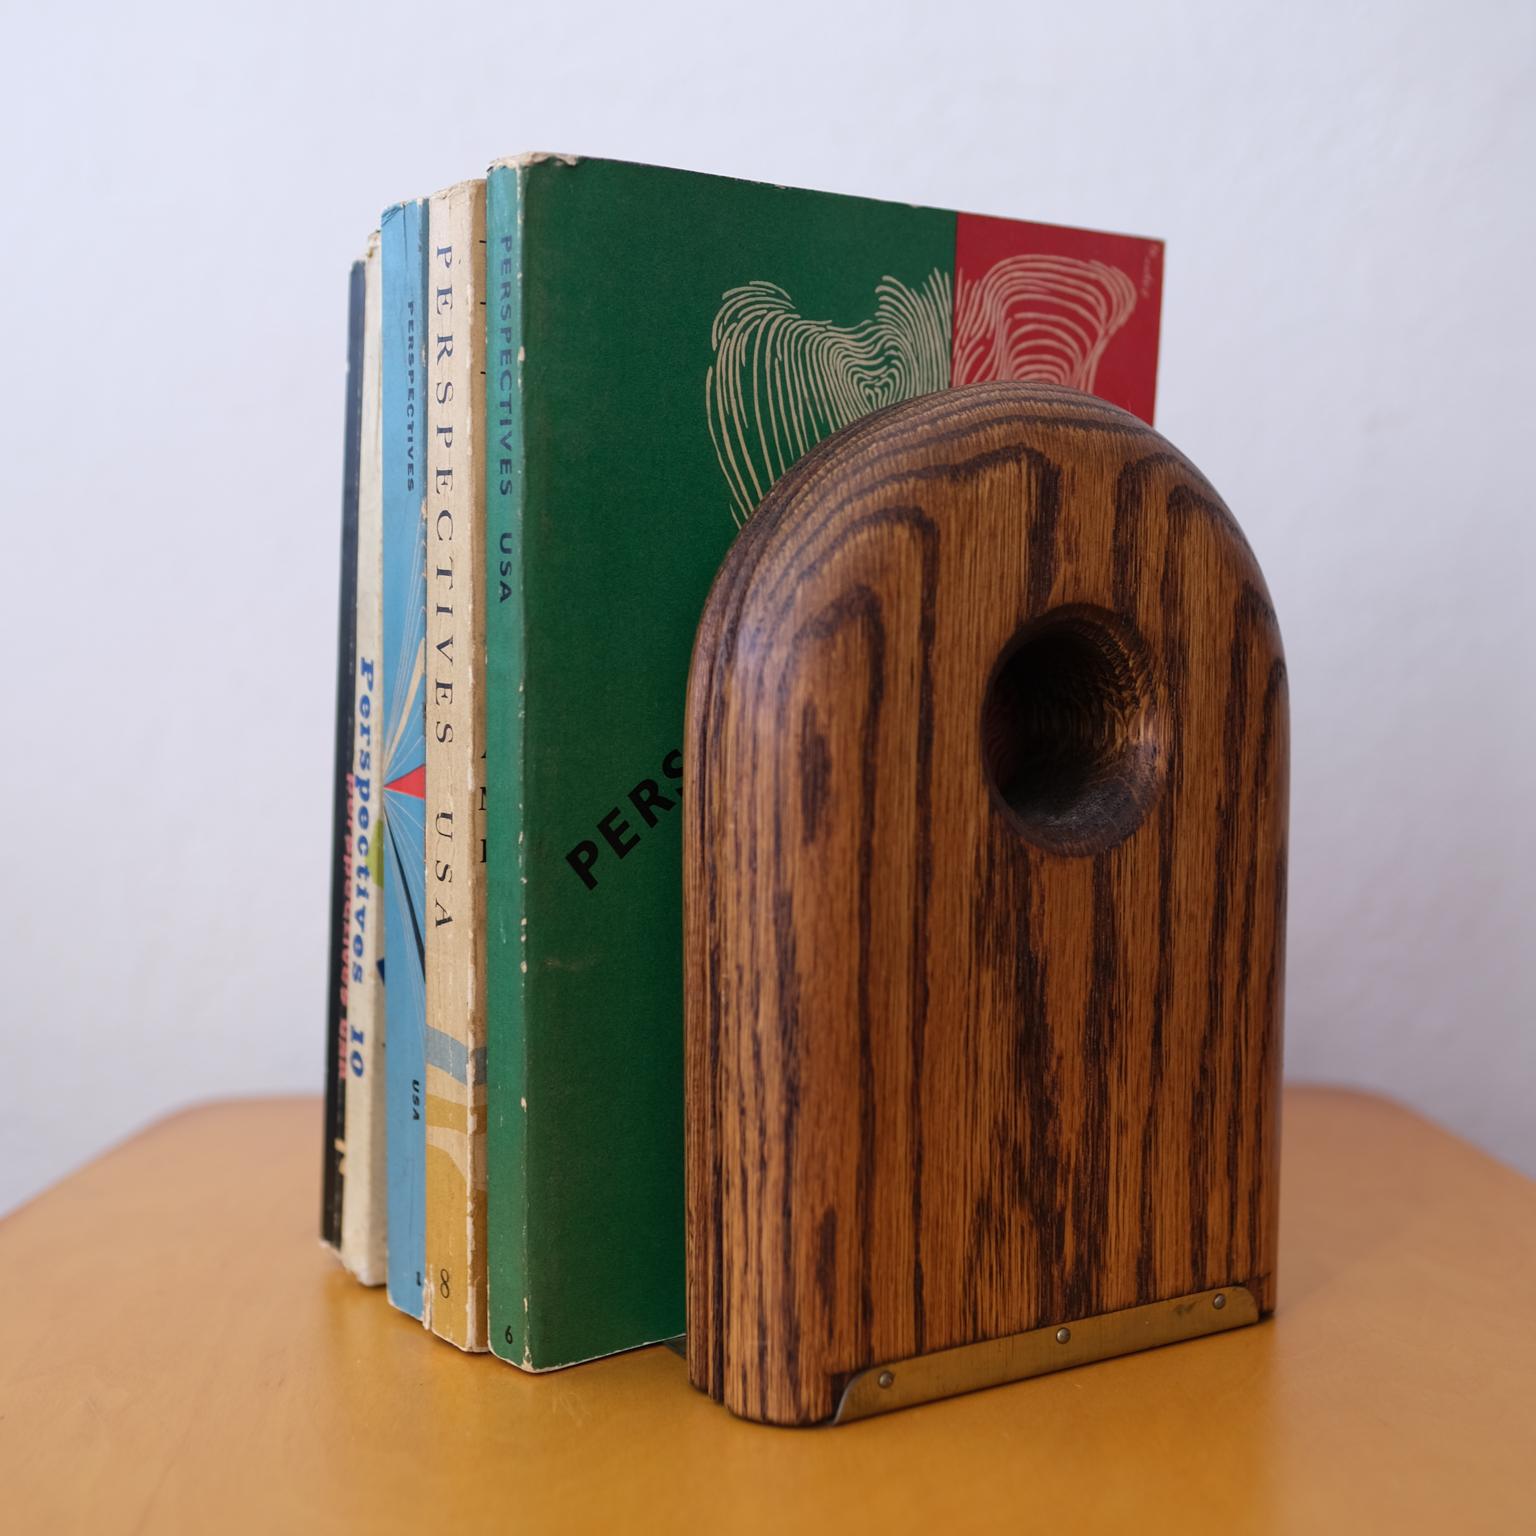 A great pair of modernist oak and brass bookends from the 1970s. Solid wood with rounded edges and carved line detail.